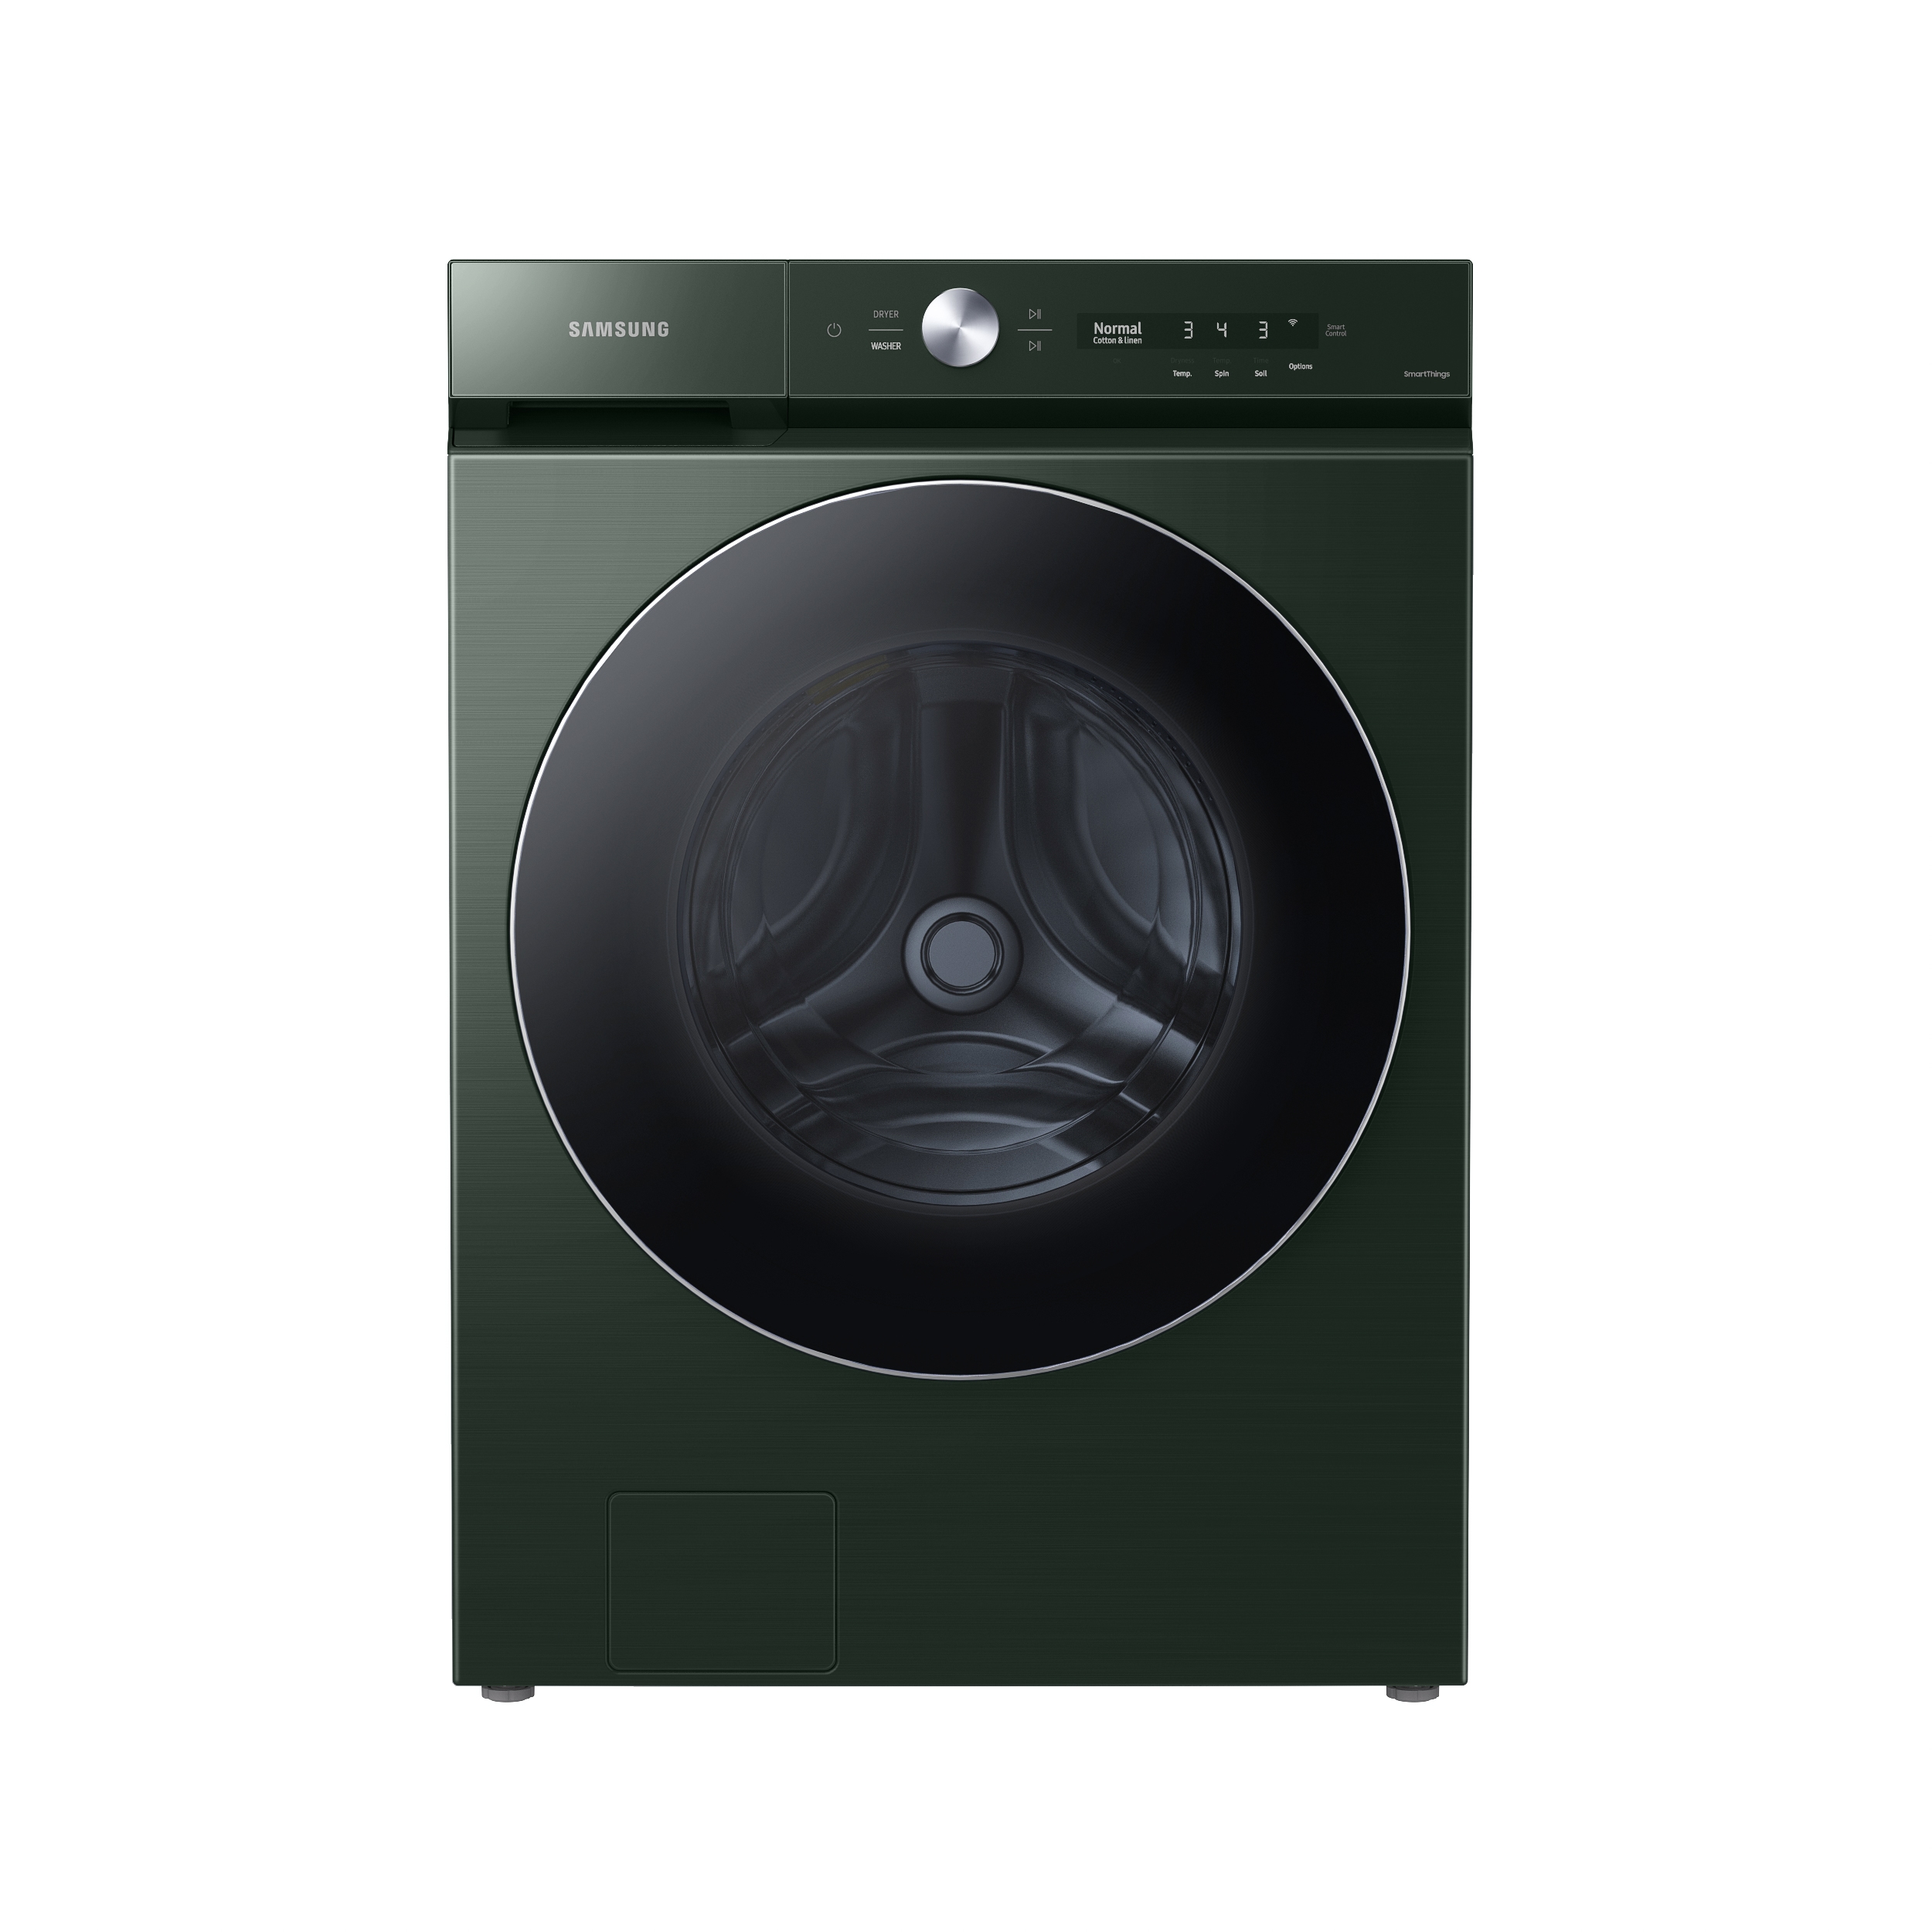 Attractive Small Washing Machine For Spotless Clothes 